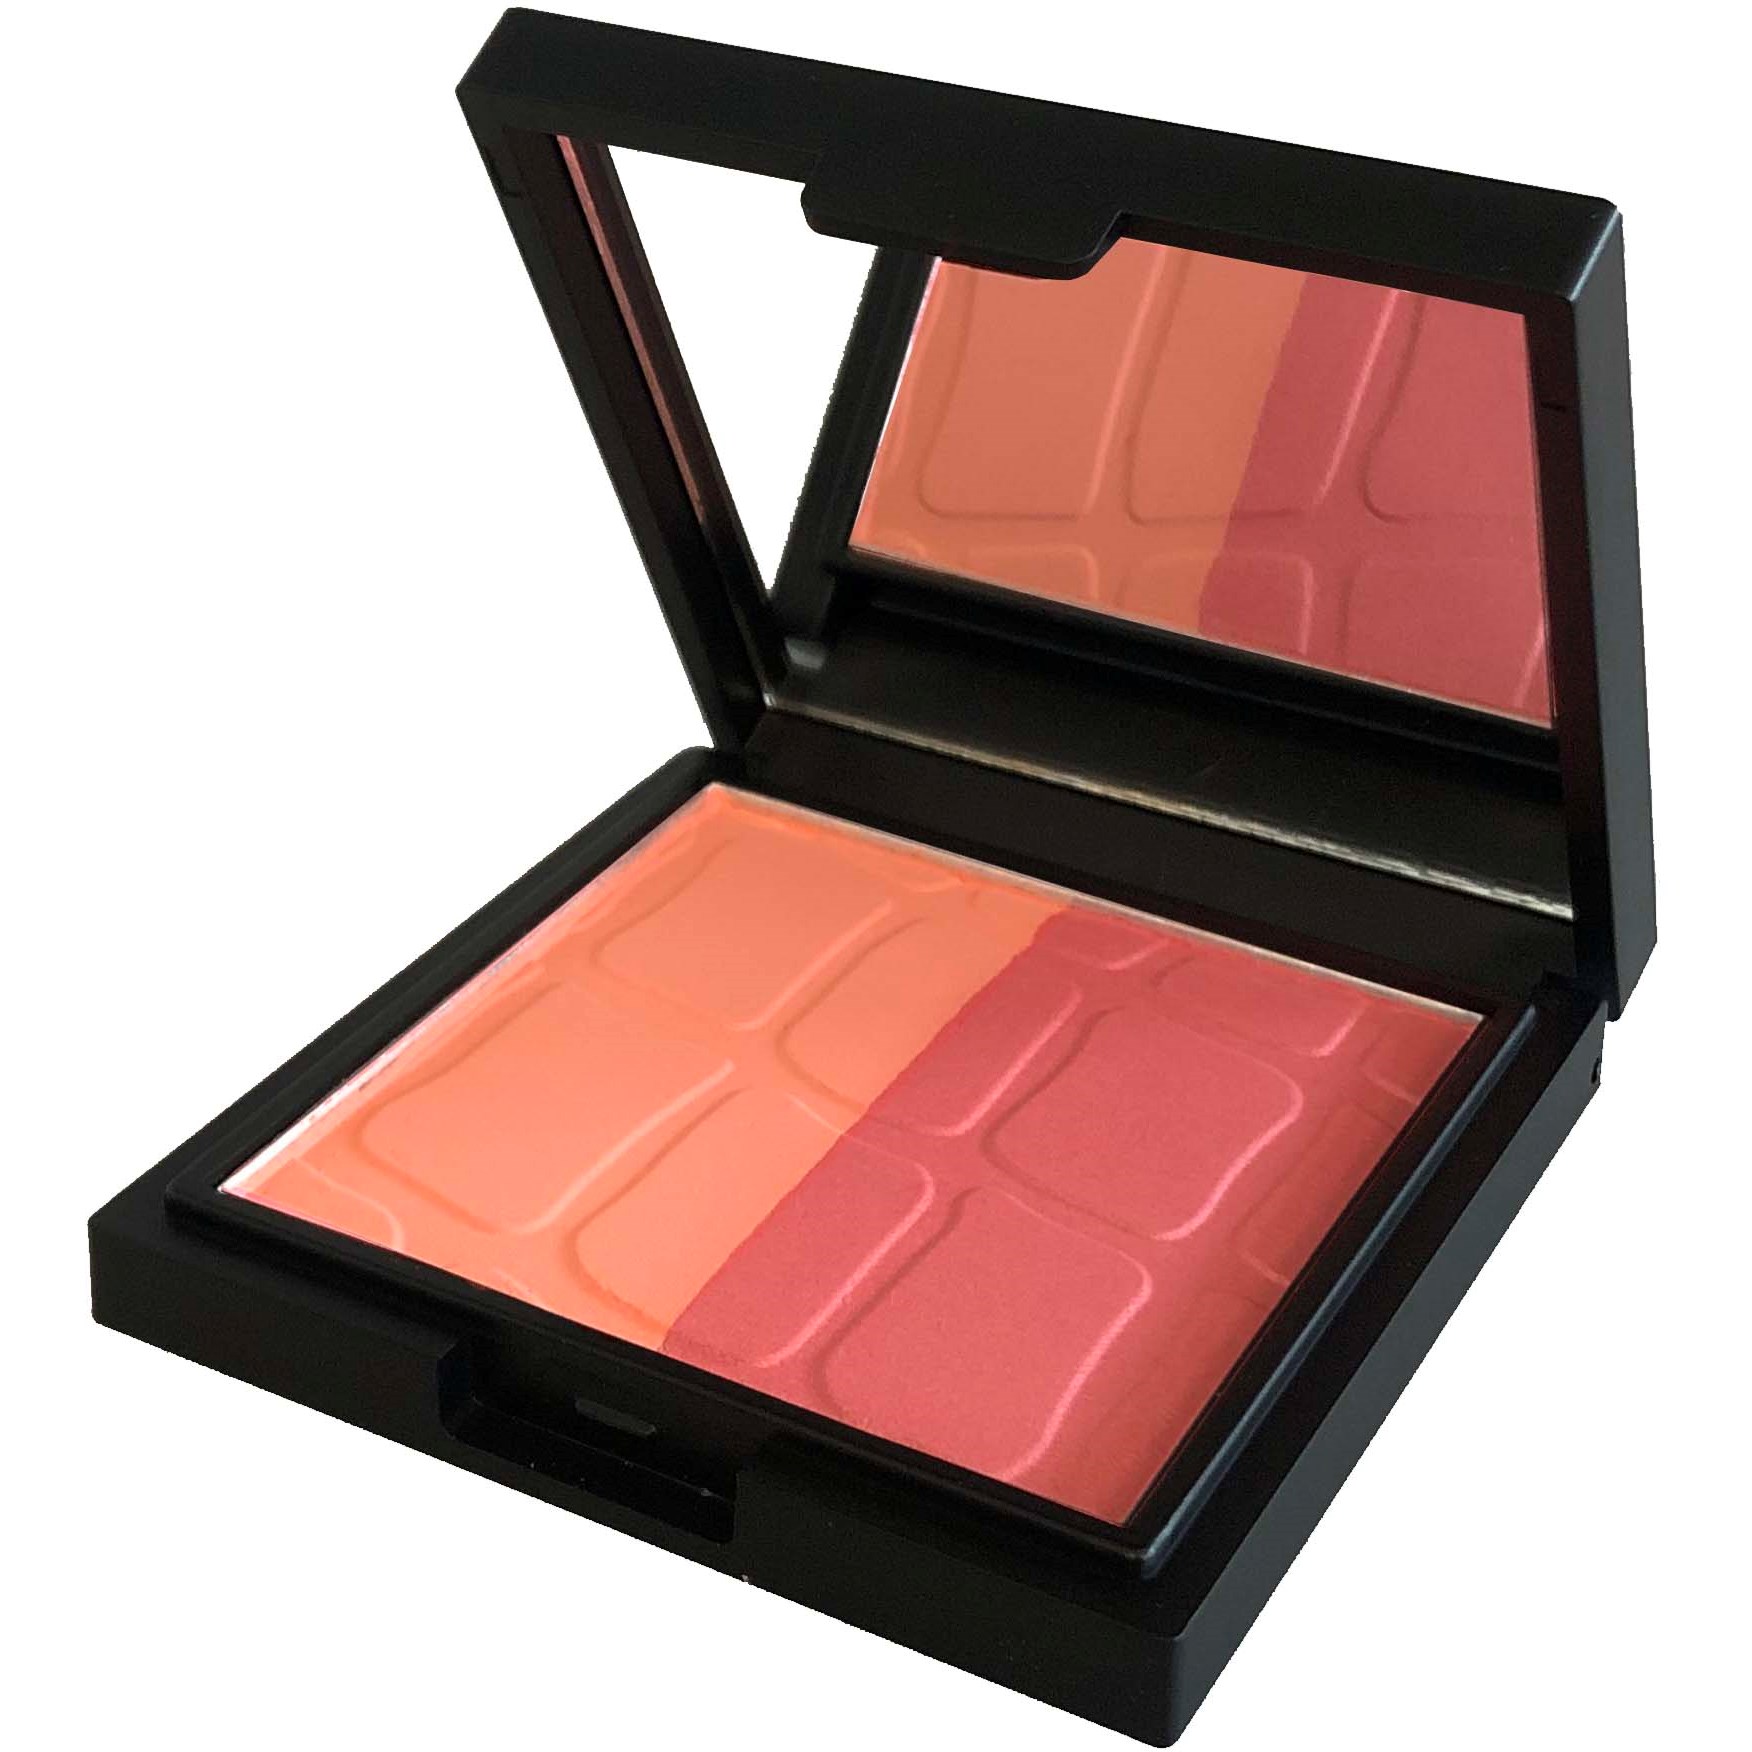 Make Up Store Duo Blush Lovely